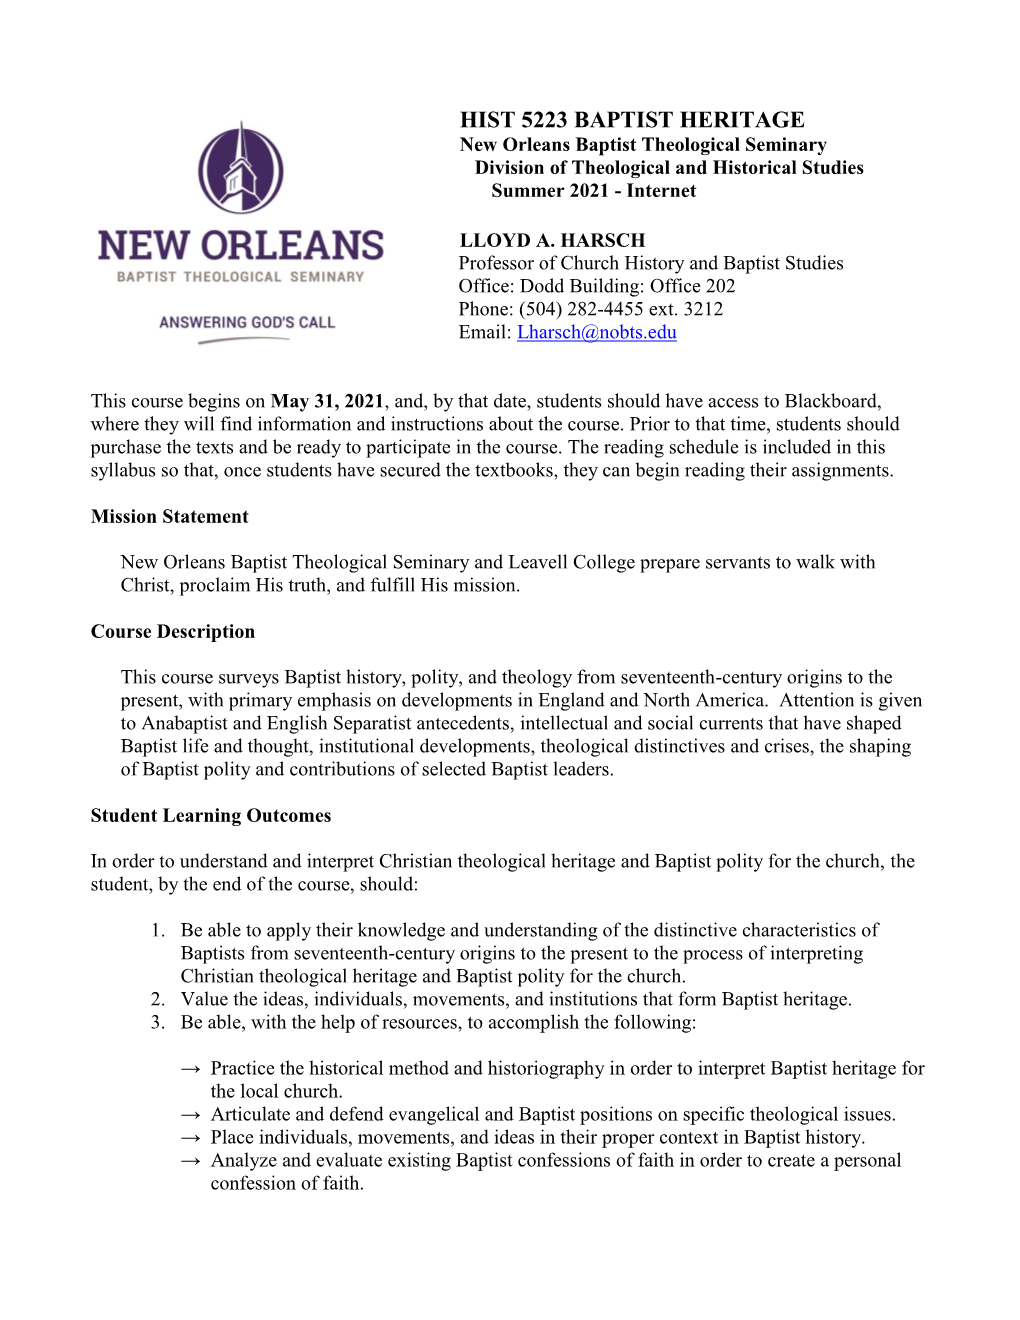 BAPTIST HERITAGE New Orleans Baptist Theological Seminary Division of Theological and Historical Studies Summer 2021 - Internet